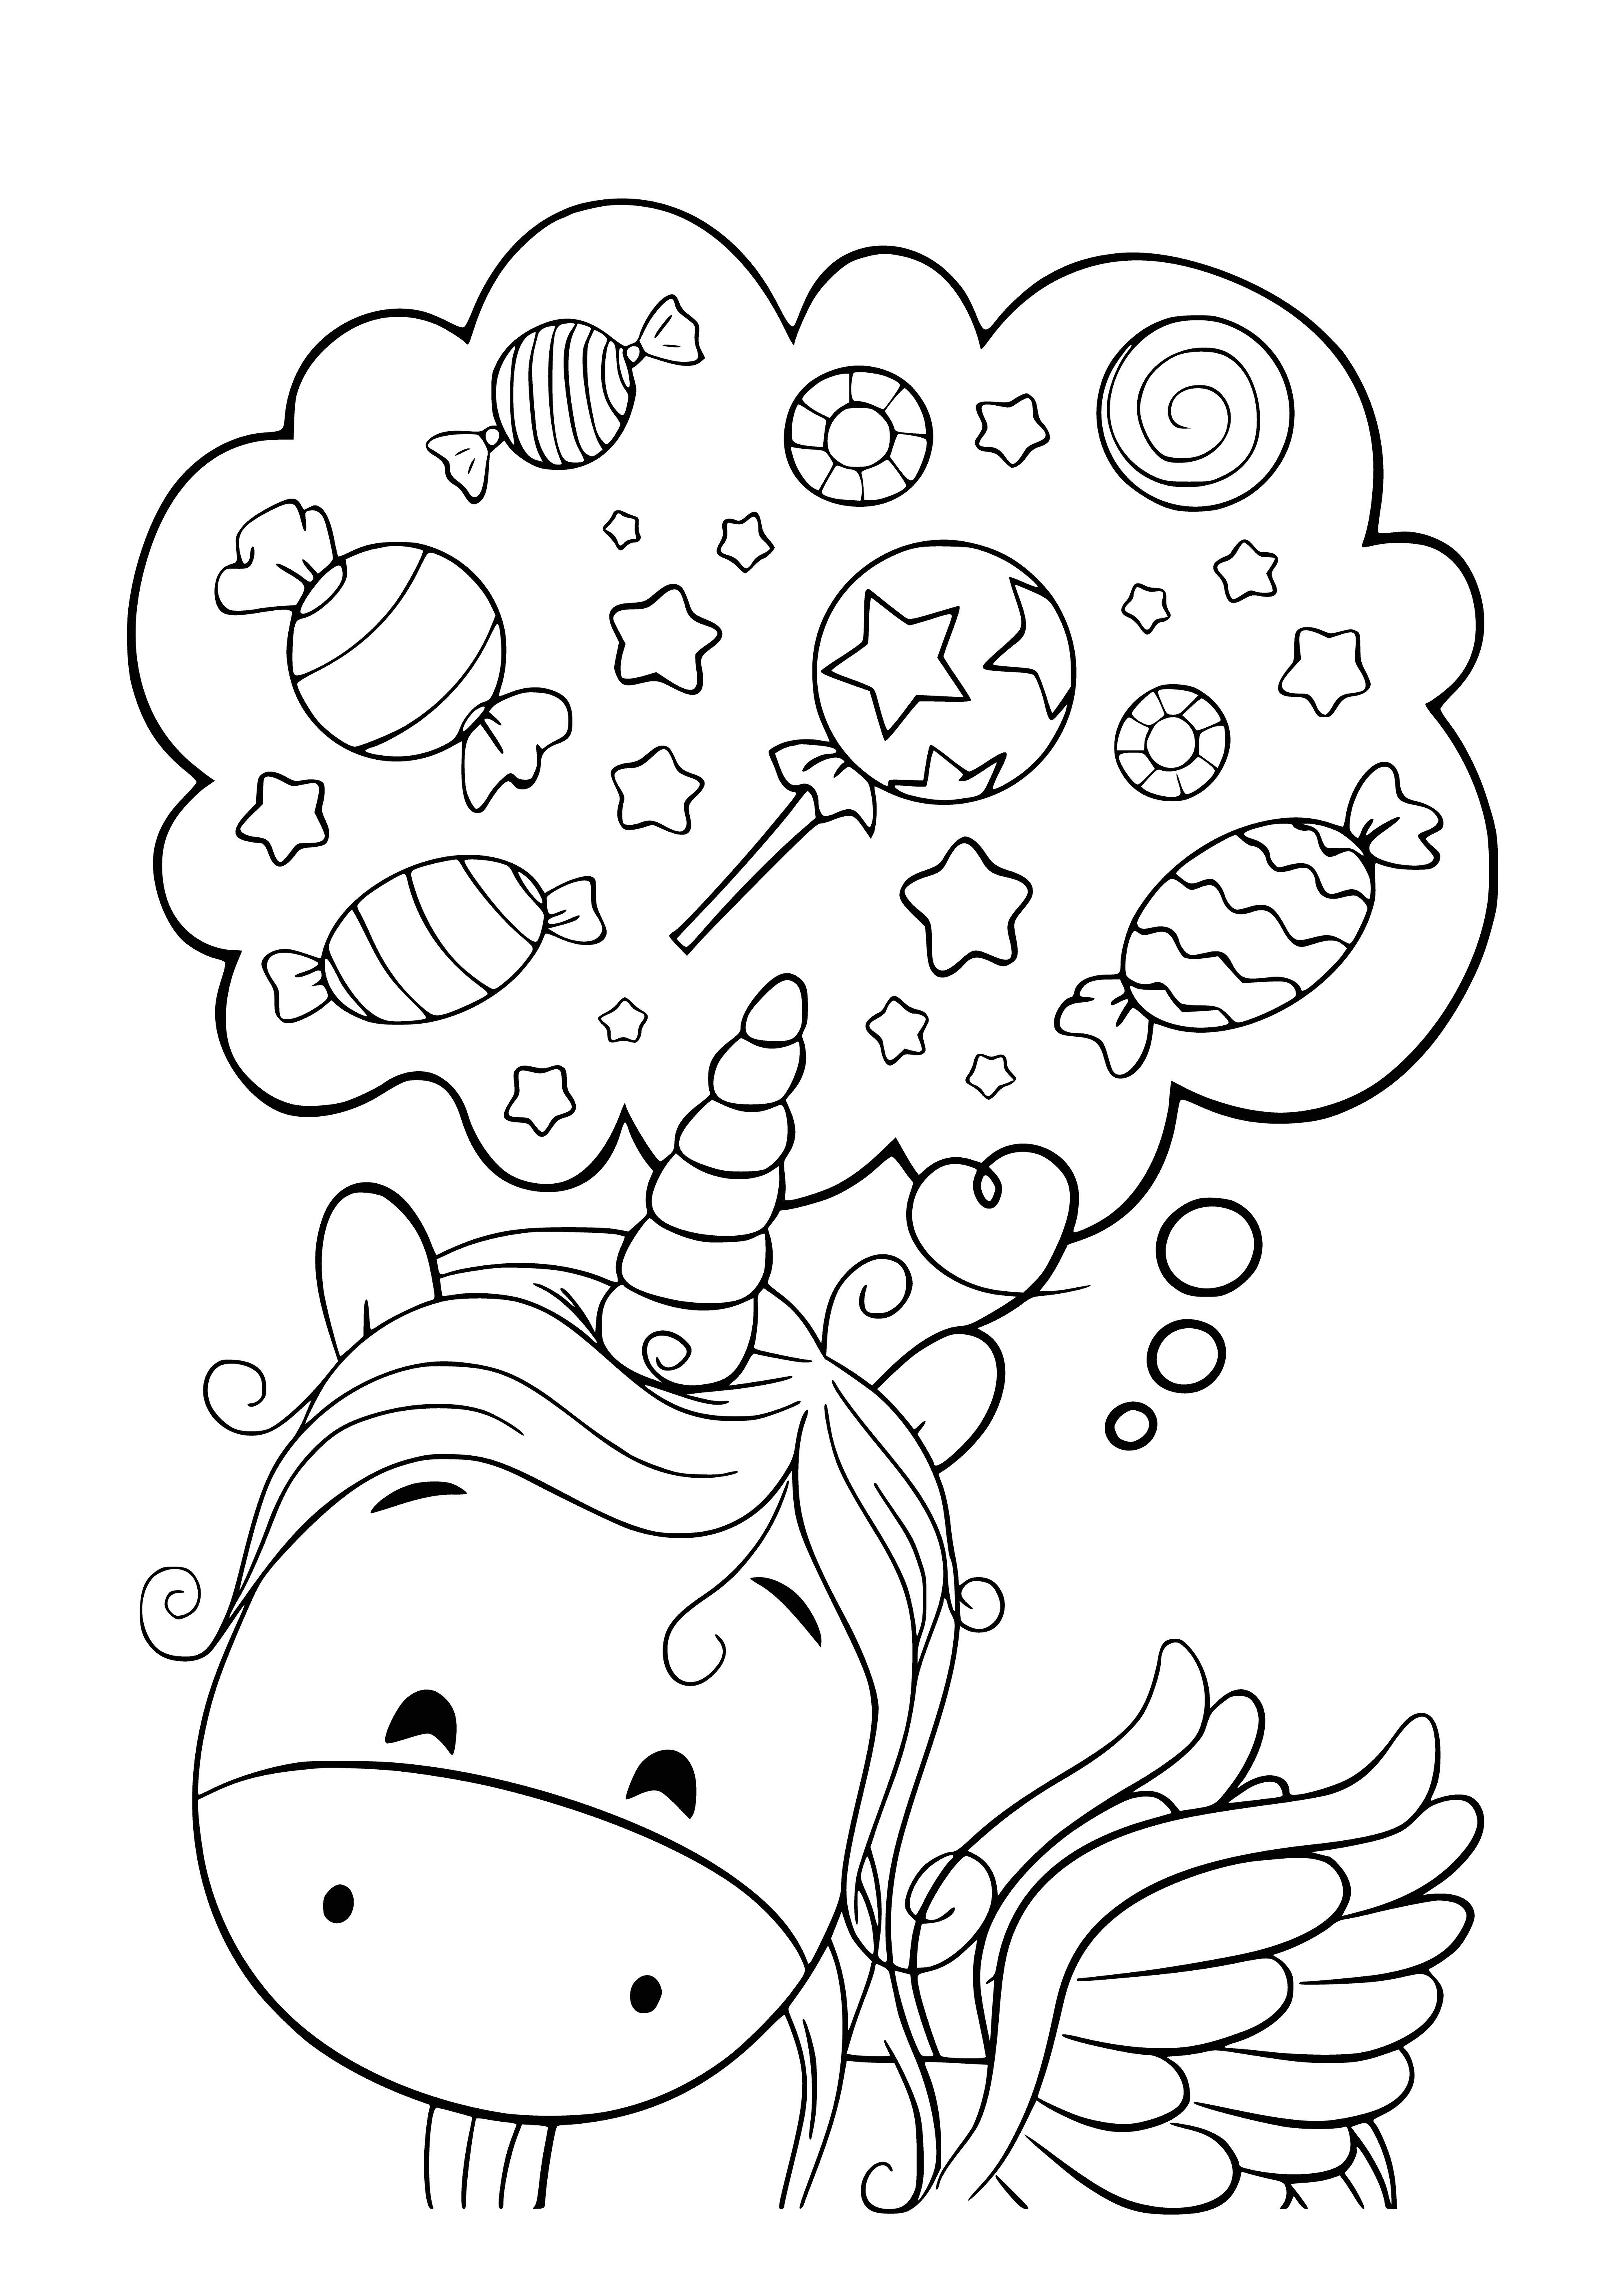 coloring page: Girl dreaming on cloud, wearing flower crown and surrounded by stars & hearts. #Kawaii #CuteColoringPages #Dreams